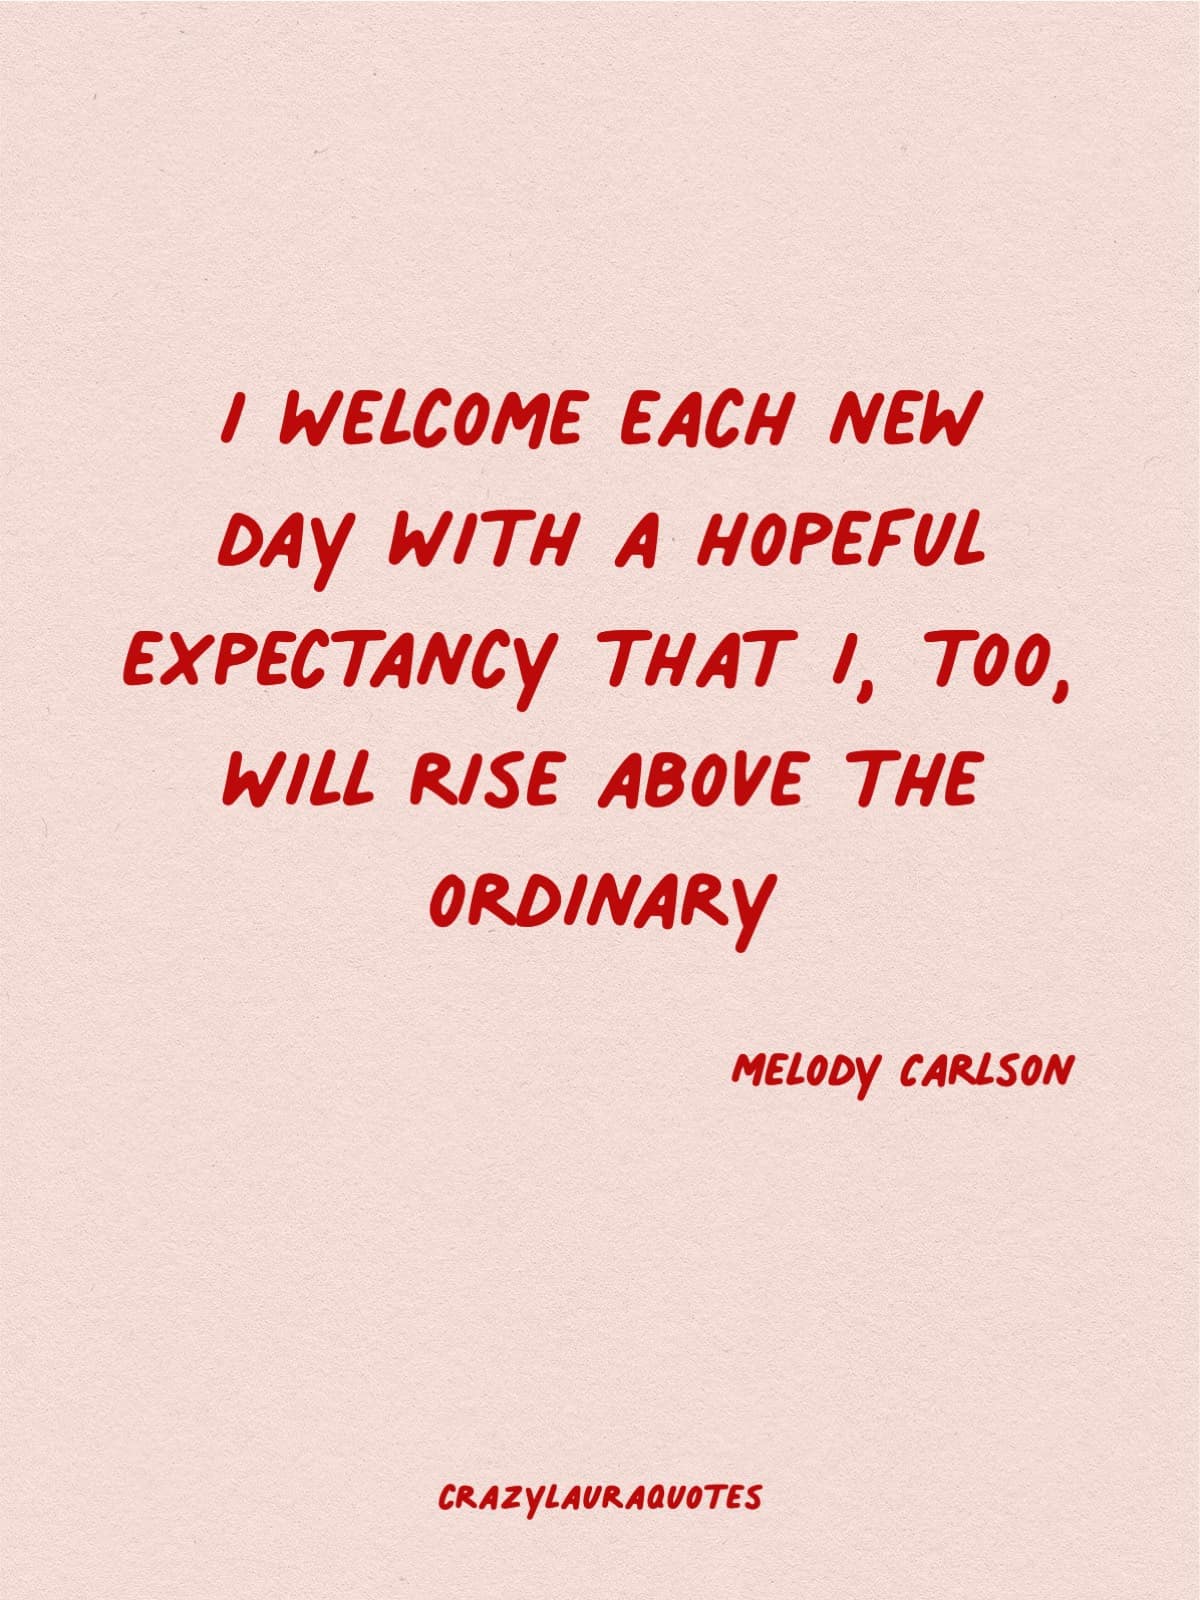 welcome new days quote meloday carlson